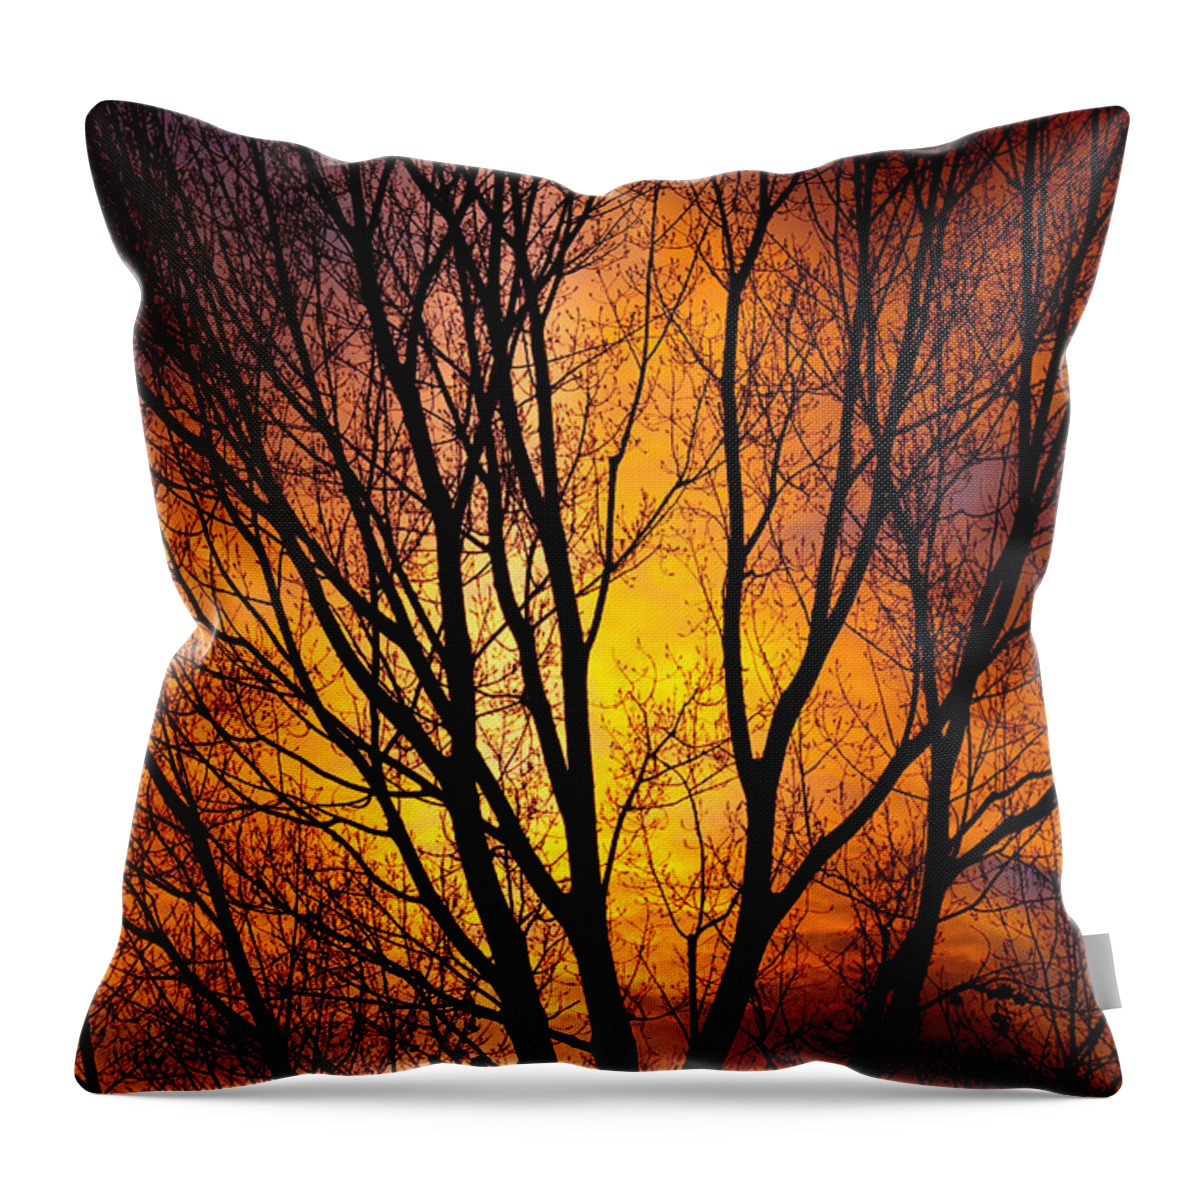 Vertical Throw Pillow featuring the photograph Colorful Tree Silhouettes by James BO Insogna